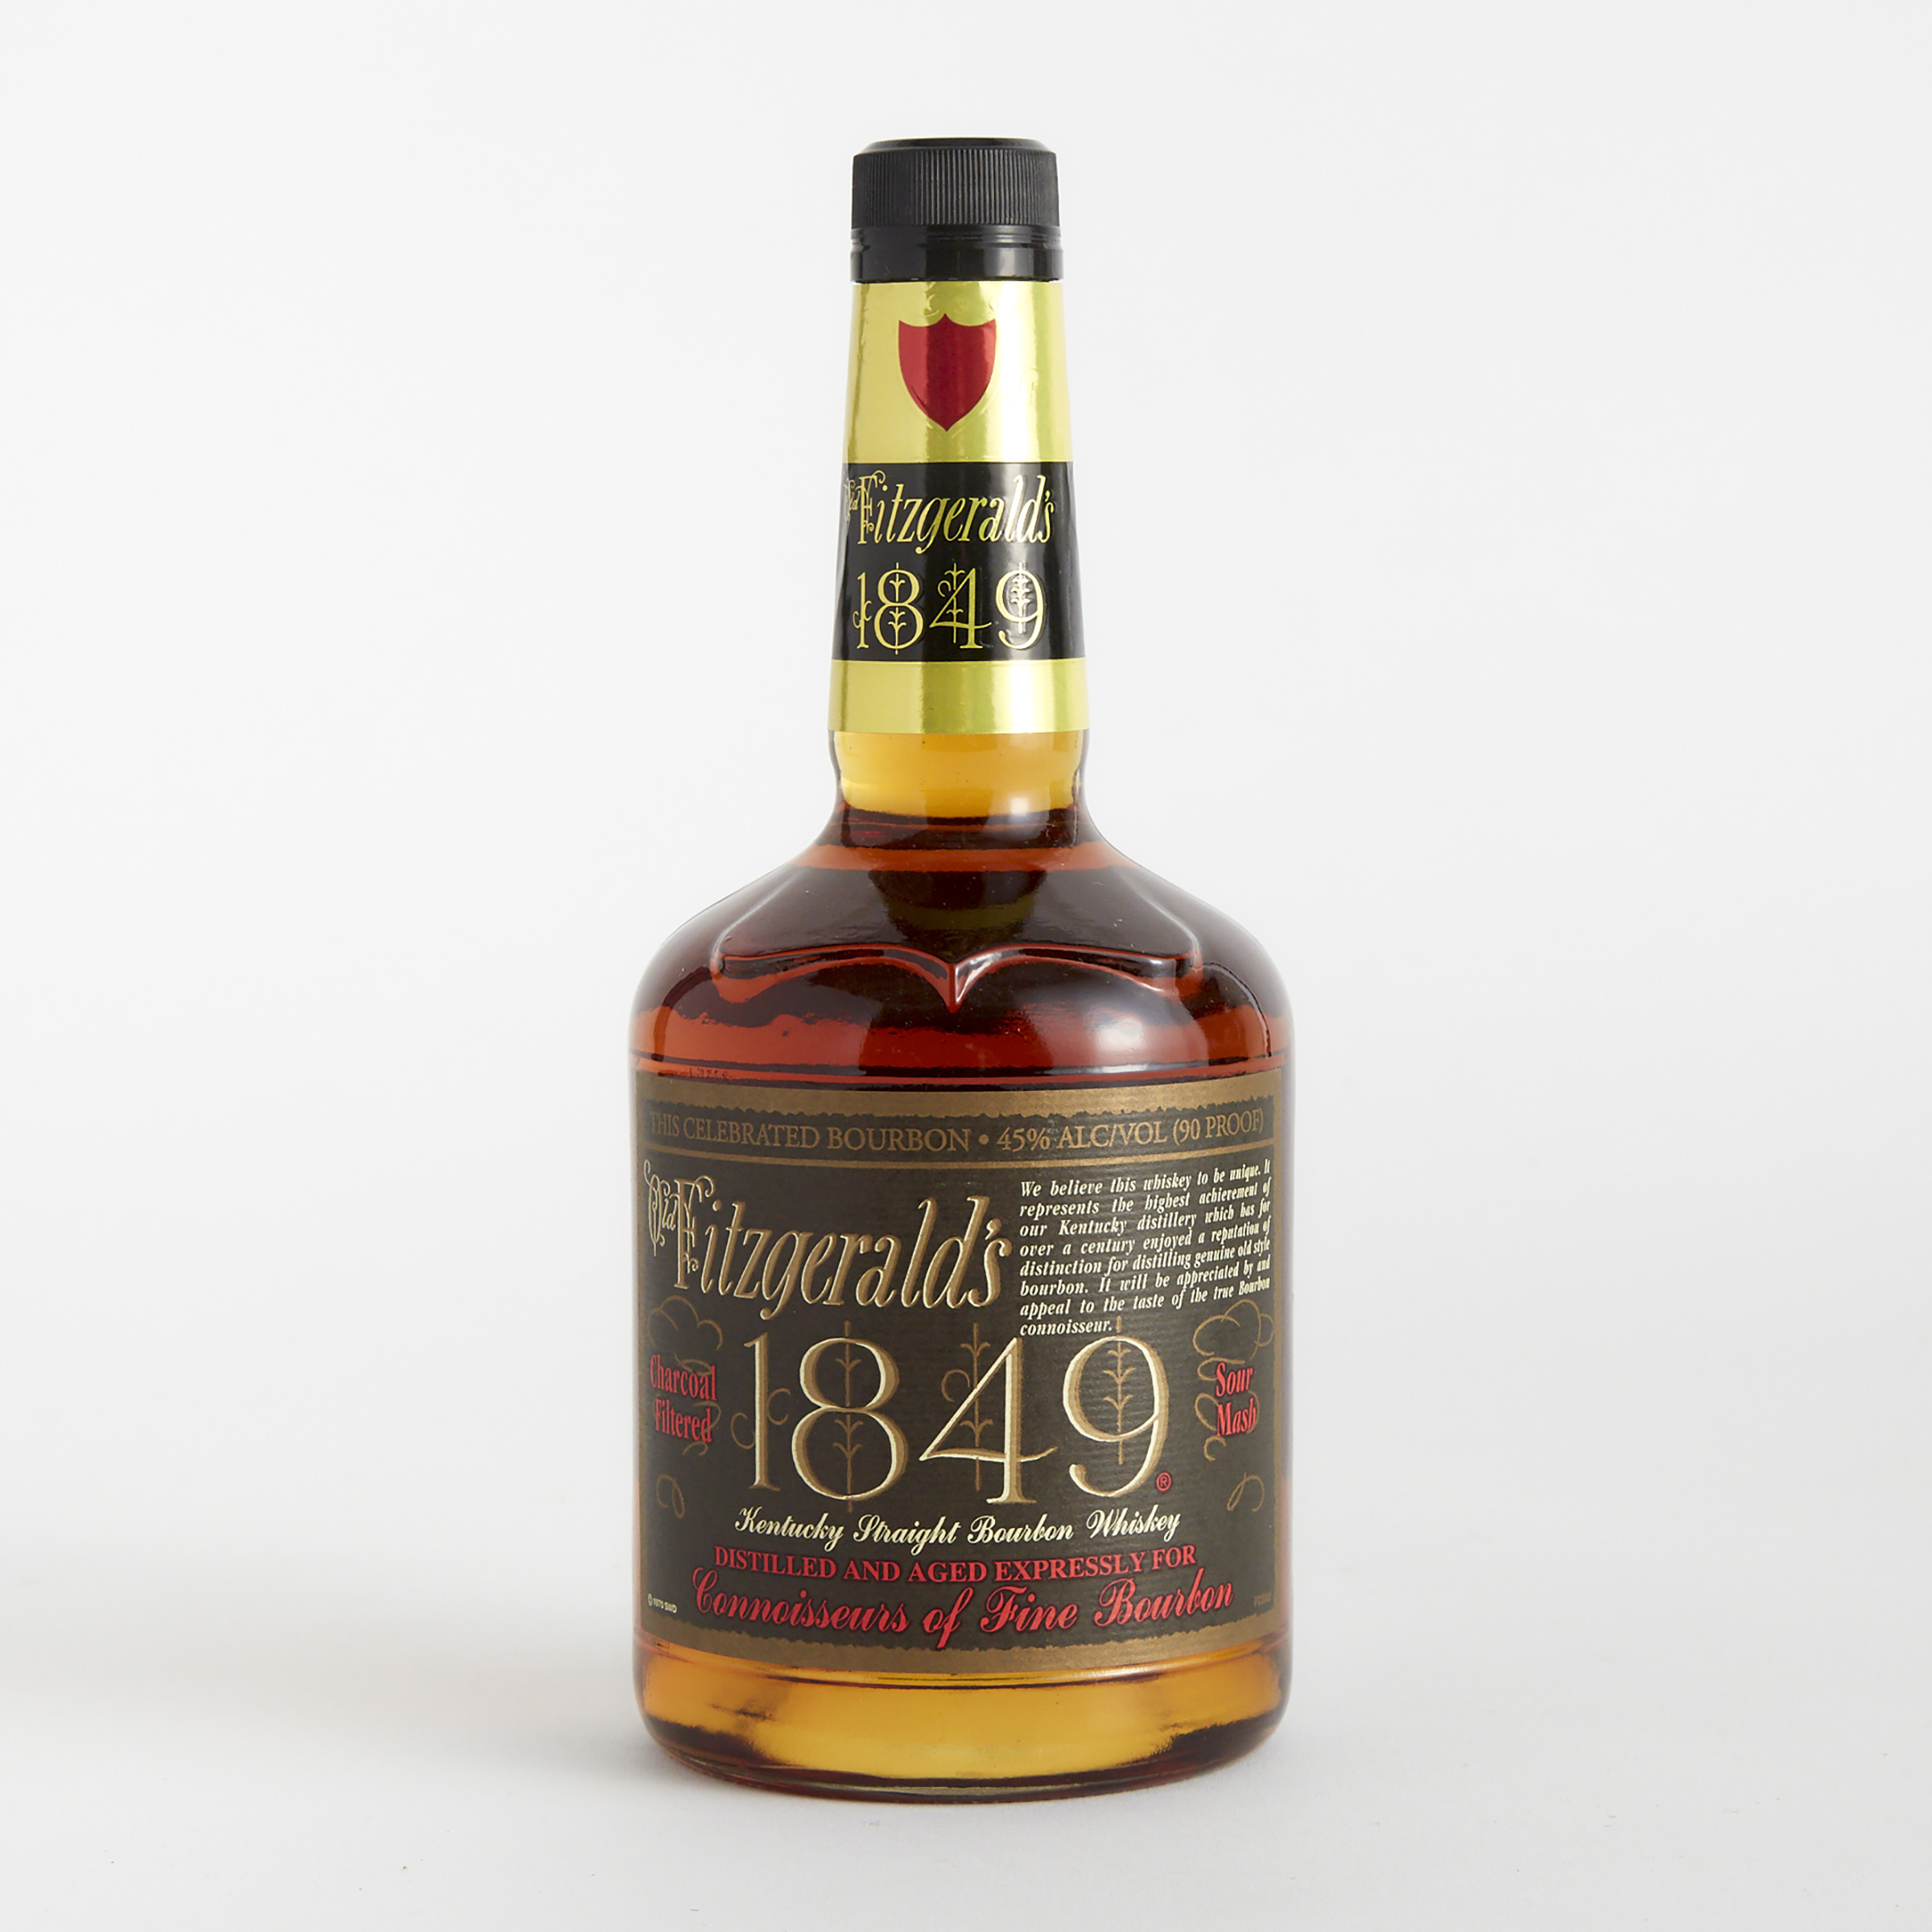 OLD FITZGERALD'S 1849 KENTUCKY STRAIGHT BOURBON WHISKEY NAS (ONE 750 ML)